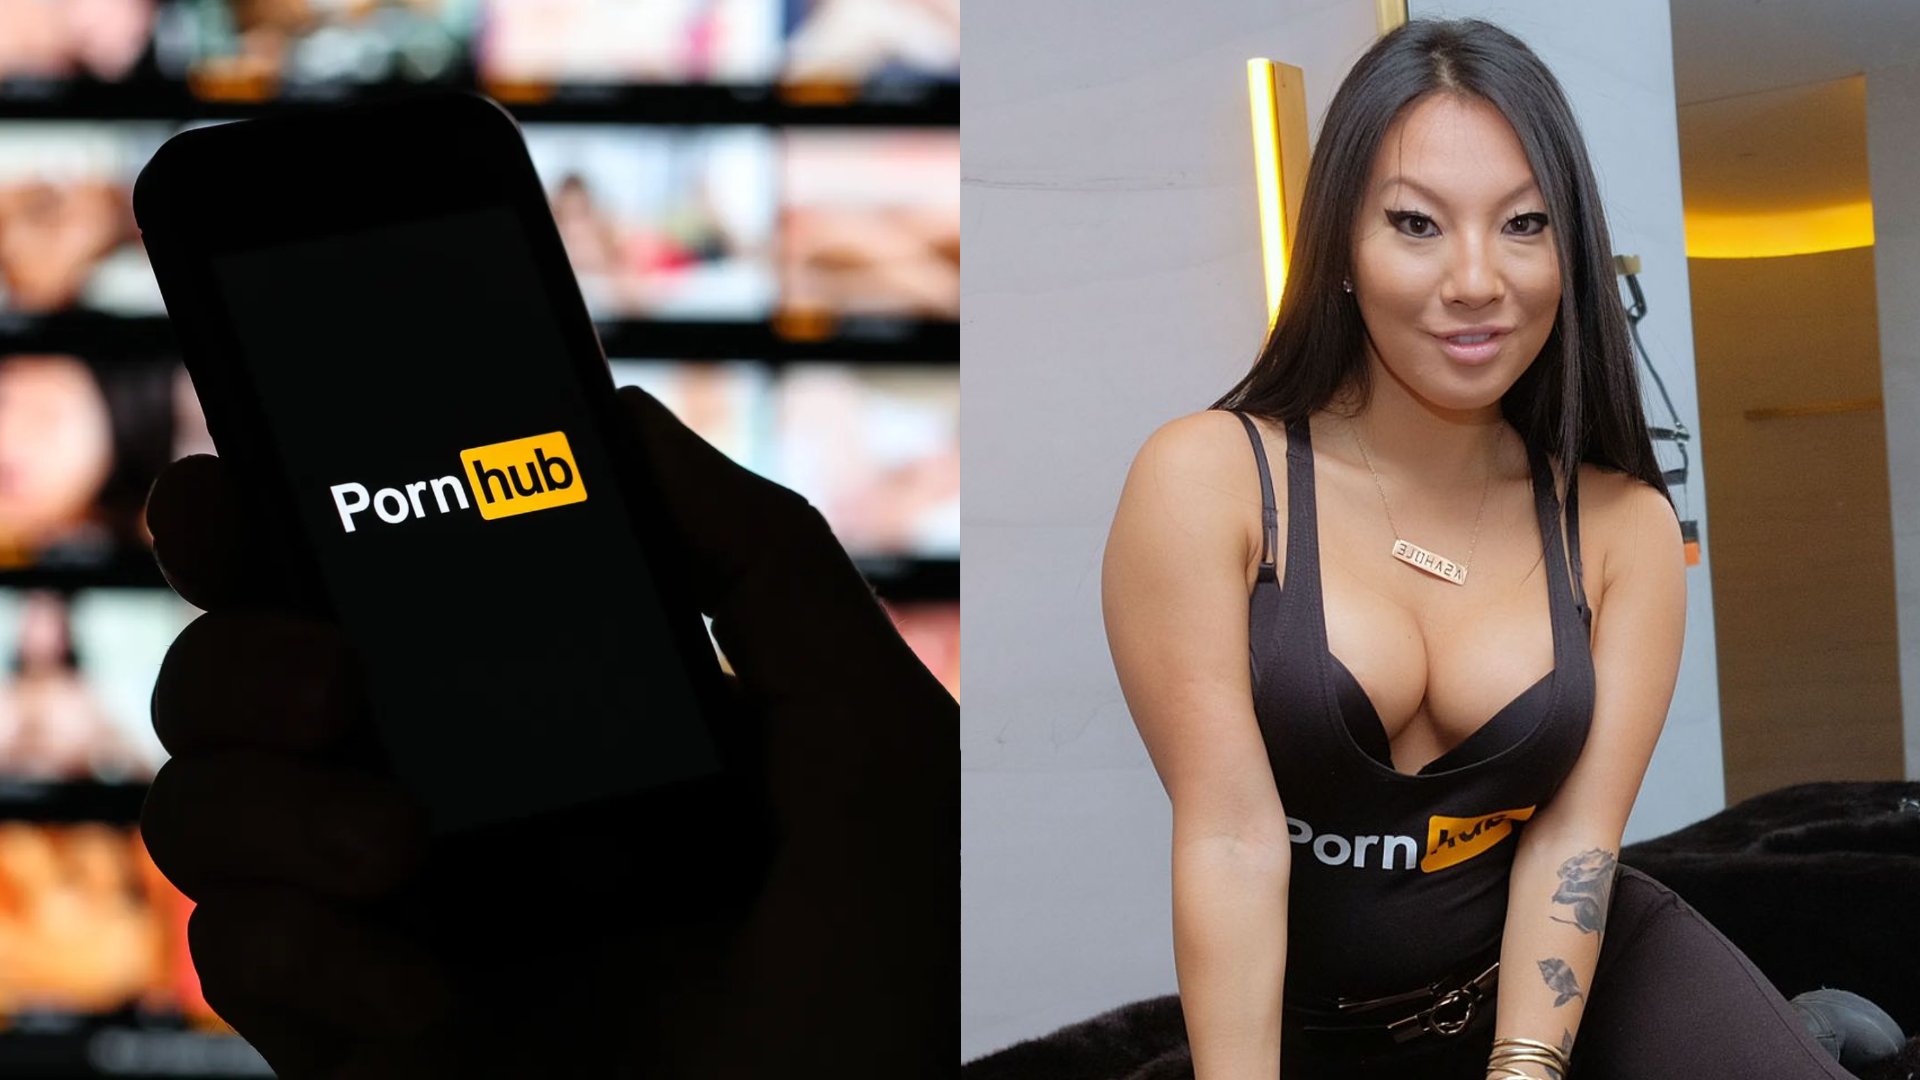 Ponrhun - Pornhub Sold To Private Equity Firm For Undisclosed Amount